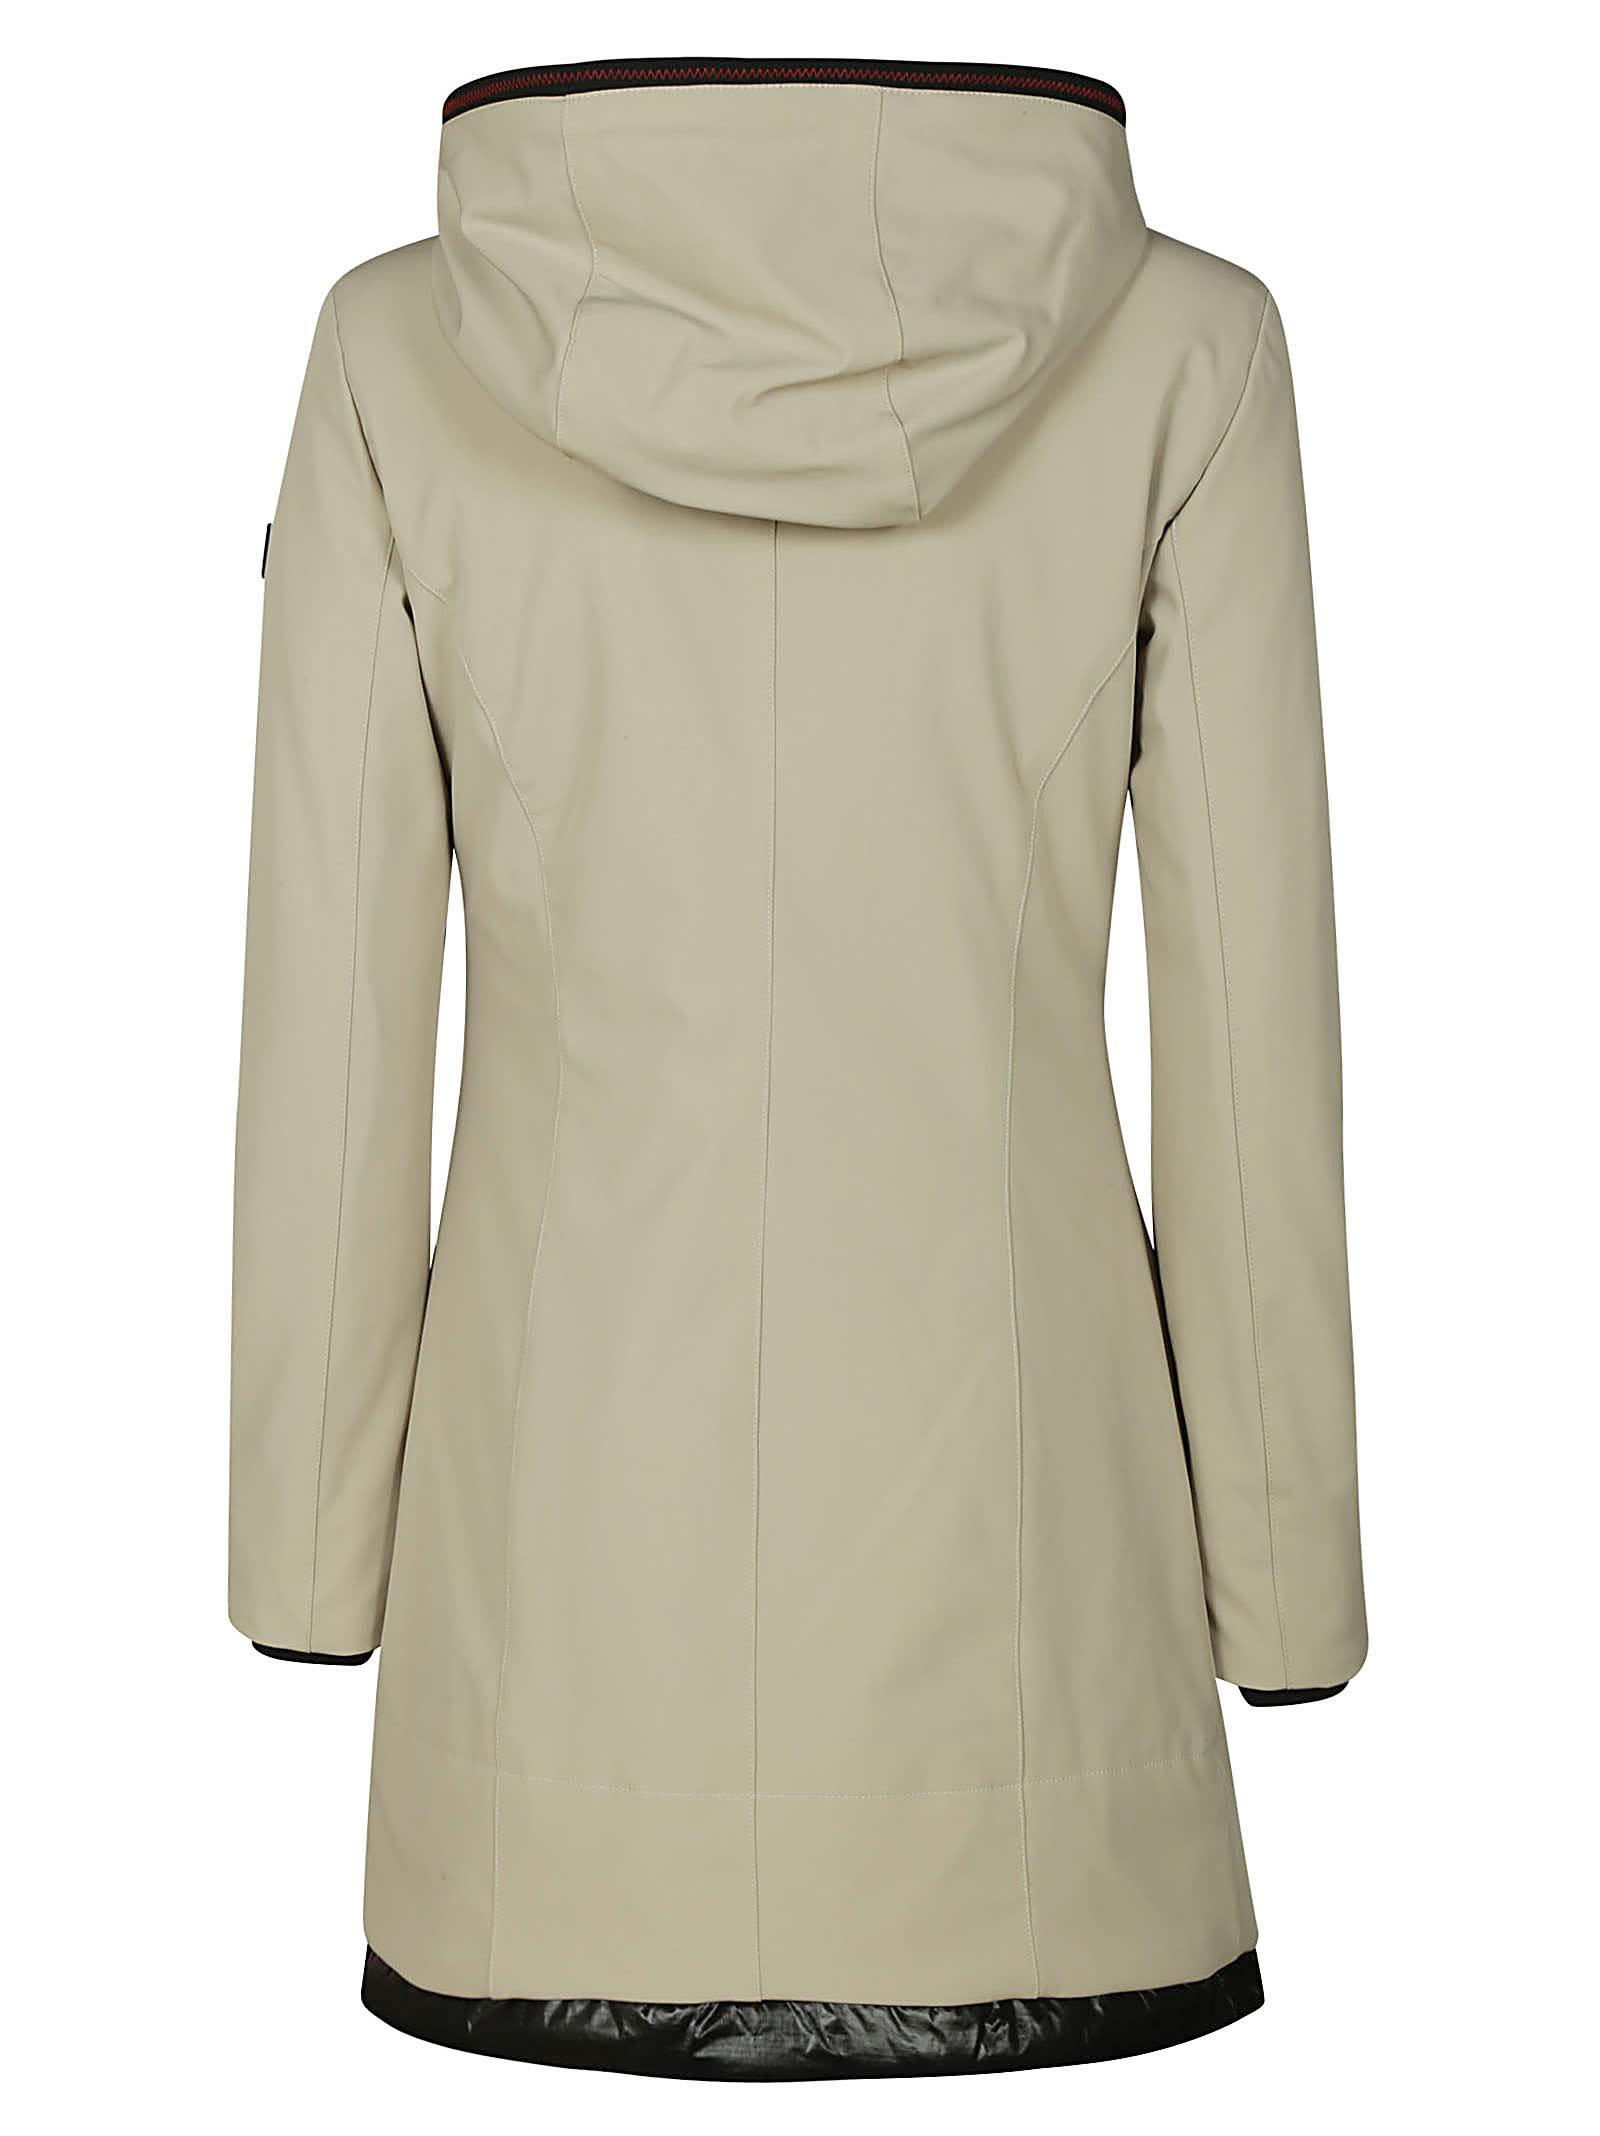 Peuterey Synthetic Bakary Parka in Beige (Natural) | Lyst